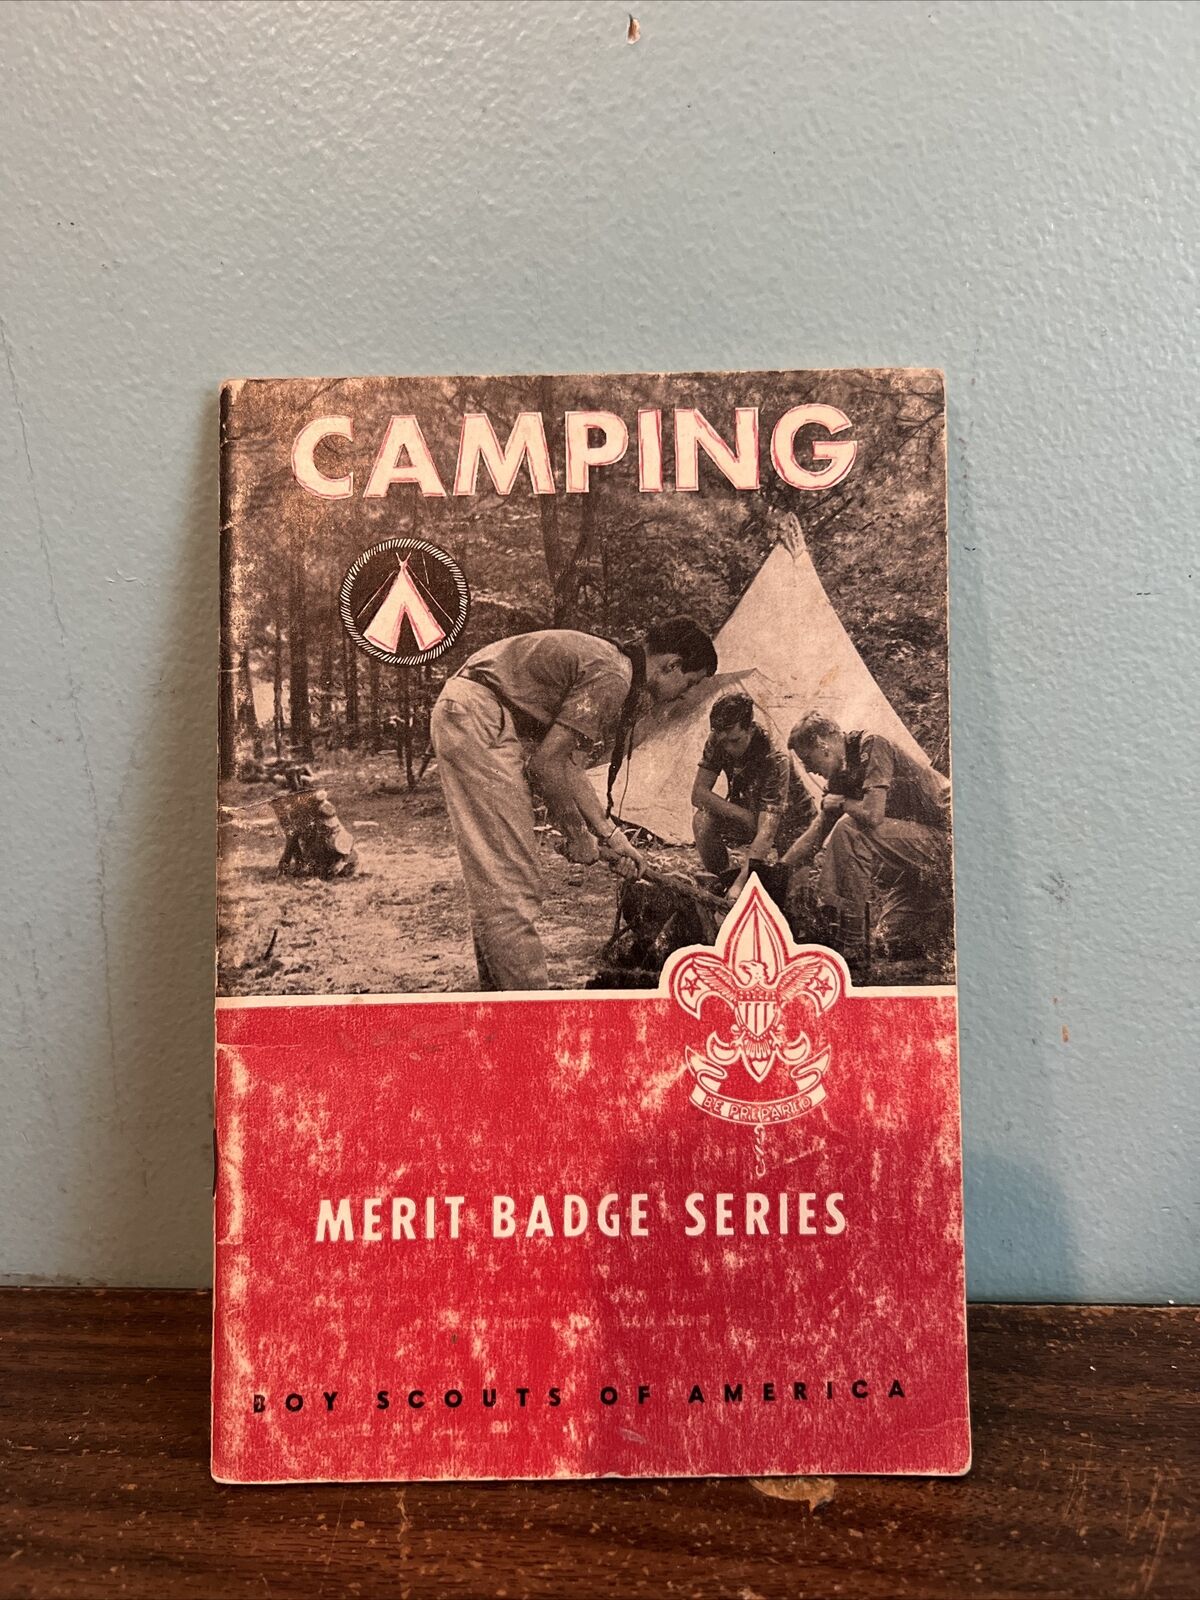 Vintage 1963 Boy Scouts Merit Badge Series Book on Camping